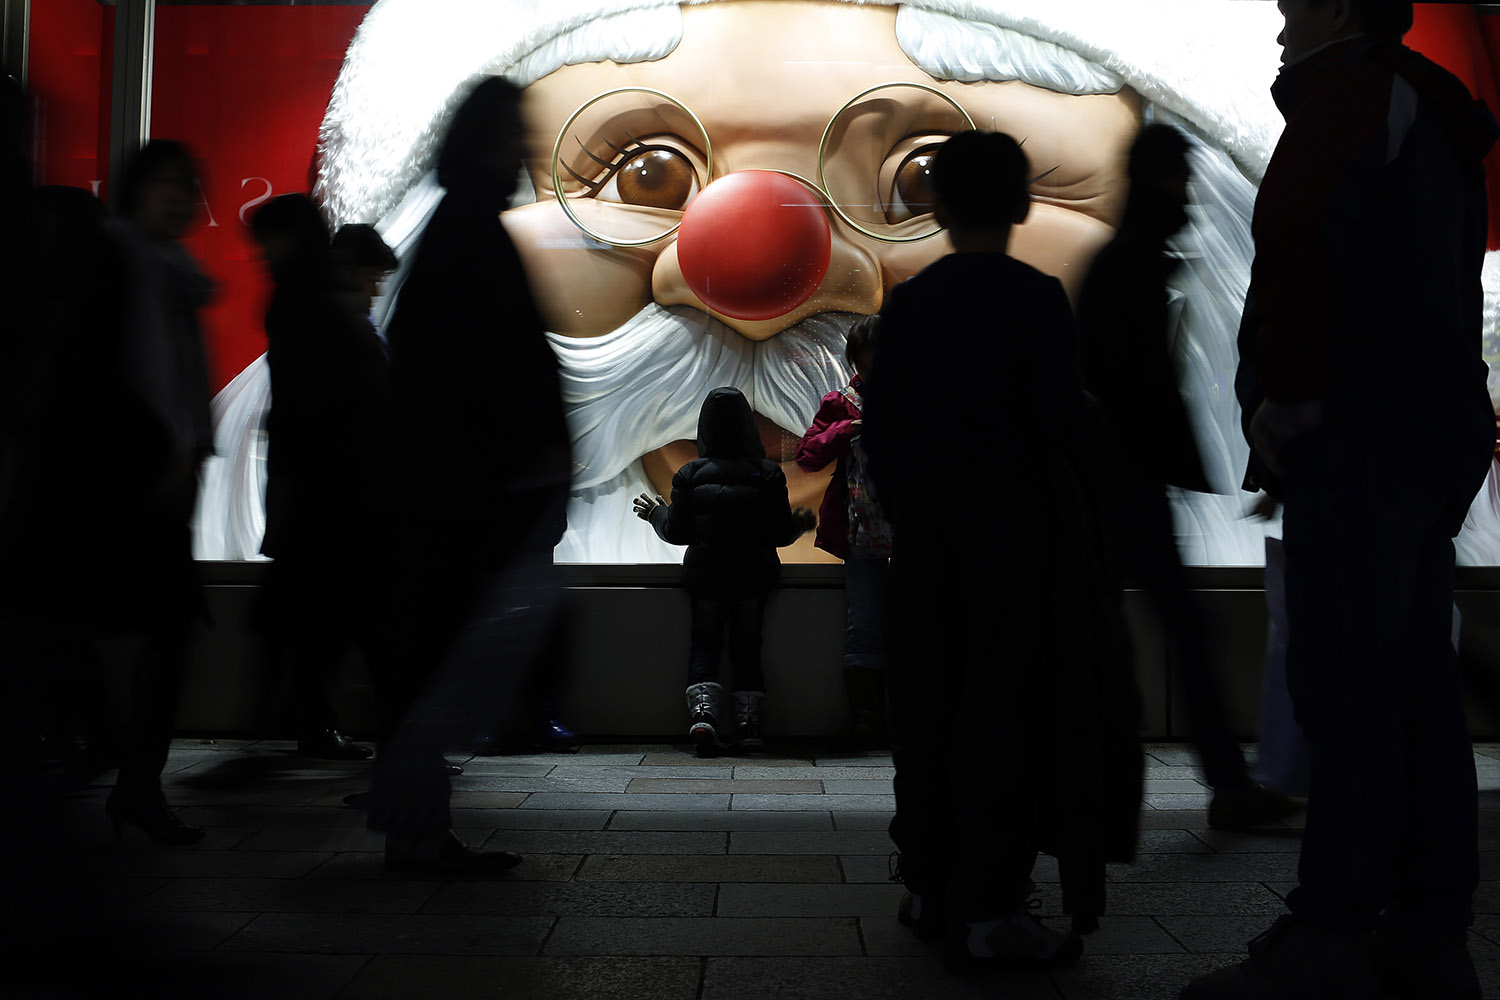 A child looks at a luxury brand store window with a Santa Claus display as people walk past at Ginza shopping district in Tokyo